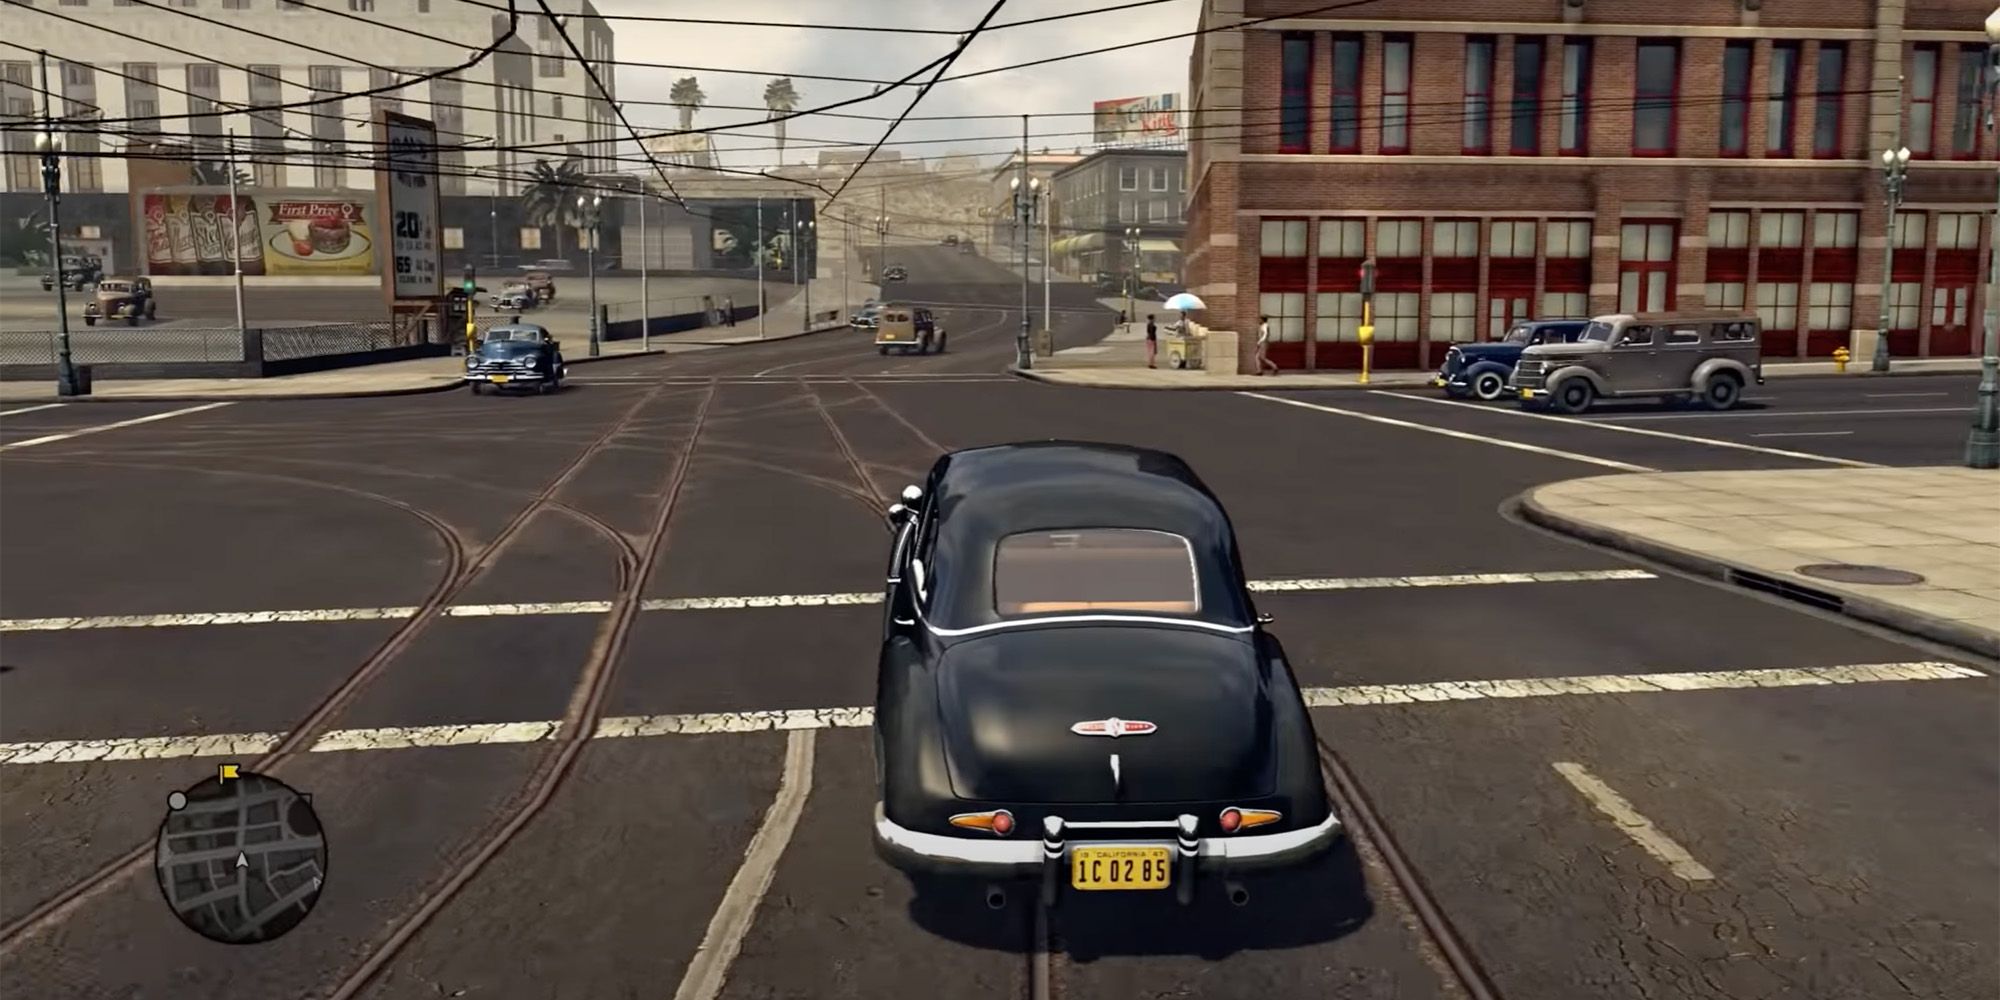 L.A. Noire - Driving Down The Road In Los Angeles